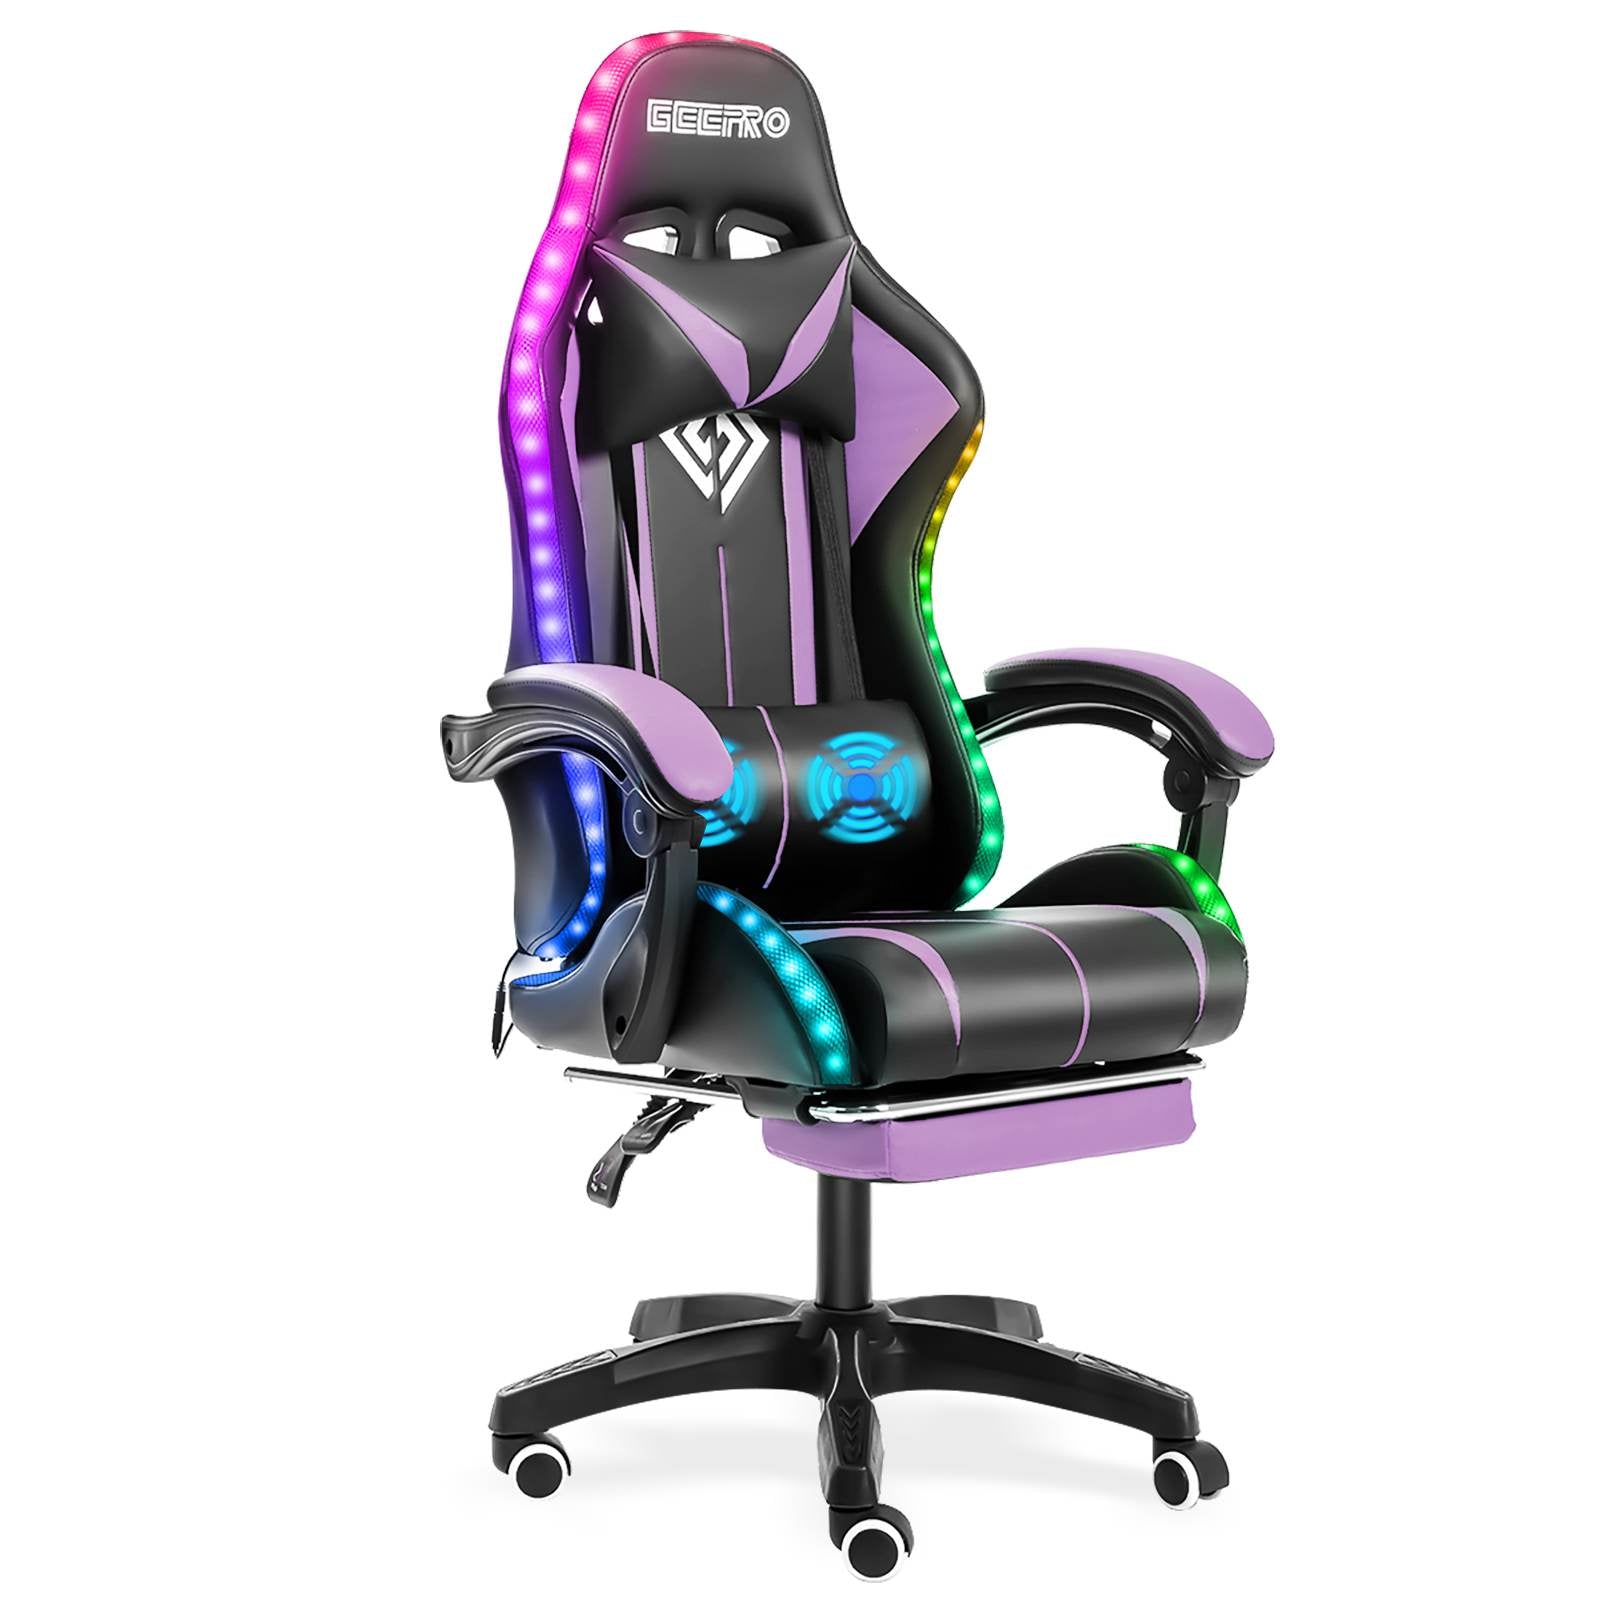 High Quality Gaming Chair RGB Light Office Chair Gamer Computer Chair Ergonomic Swivel Chair 2 Point Massage Gamer Chairs ZopiStyle